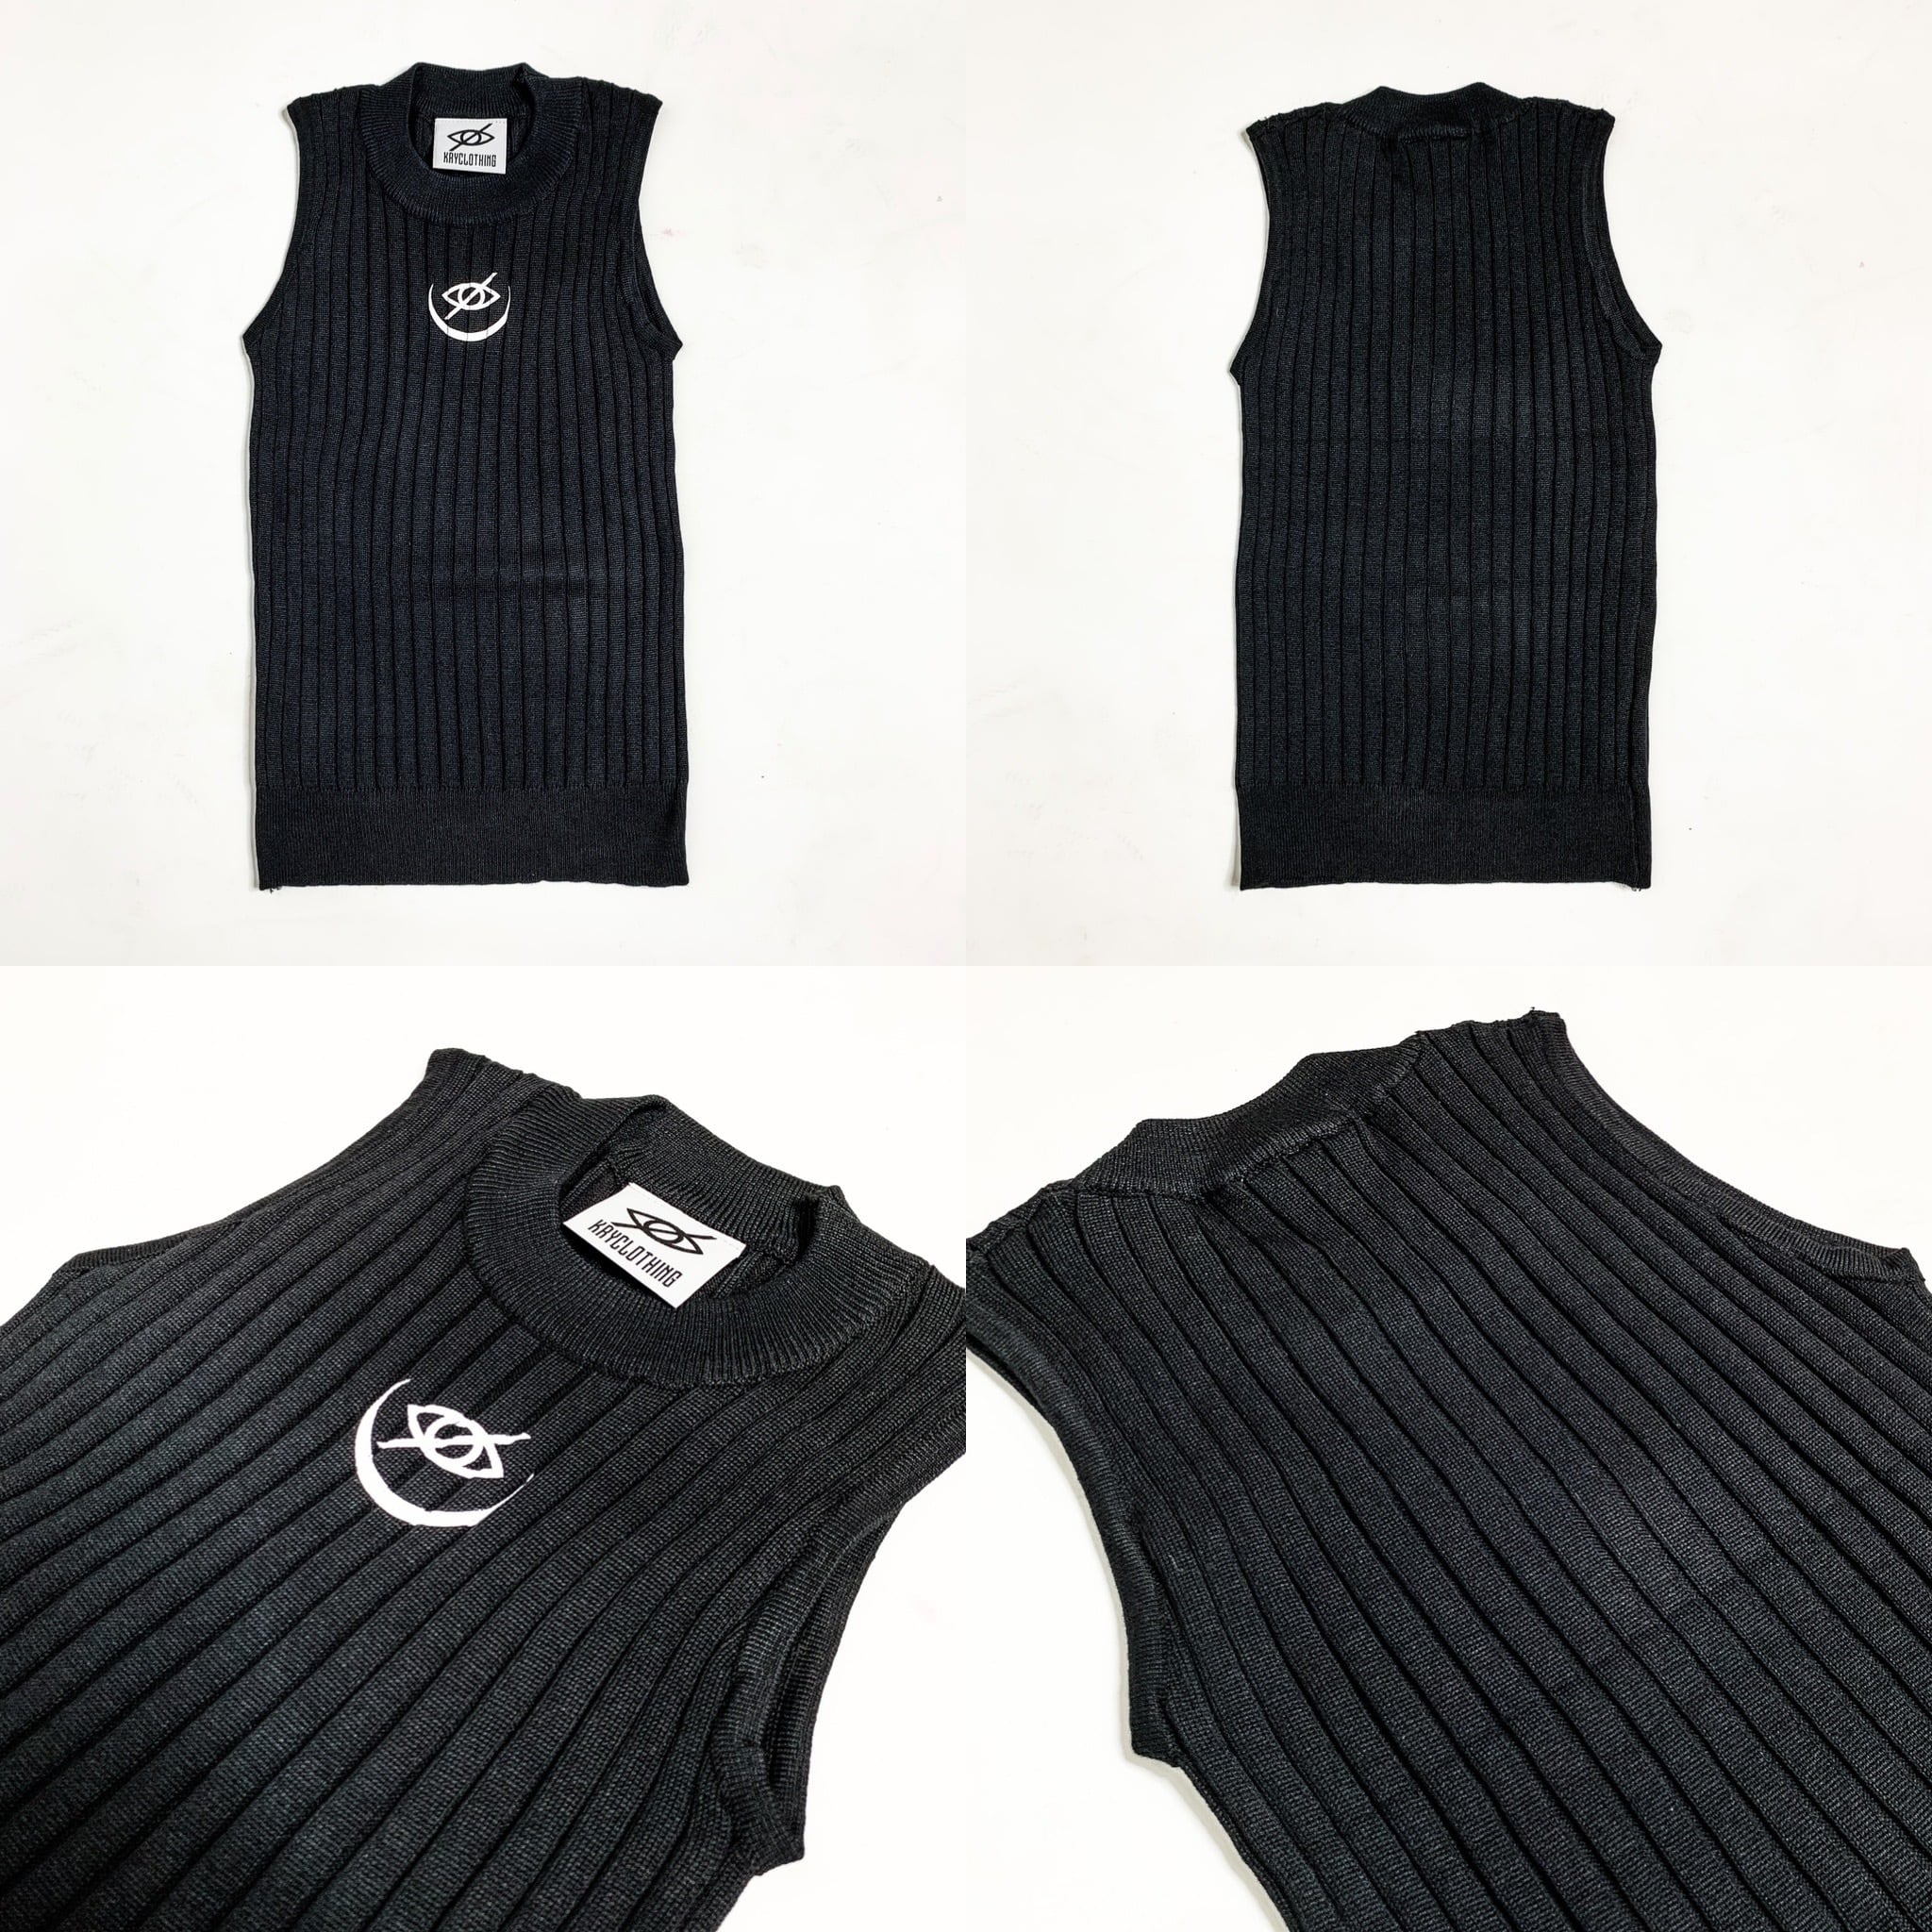 「TANK」 | KRY clothing powered by BASE